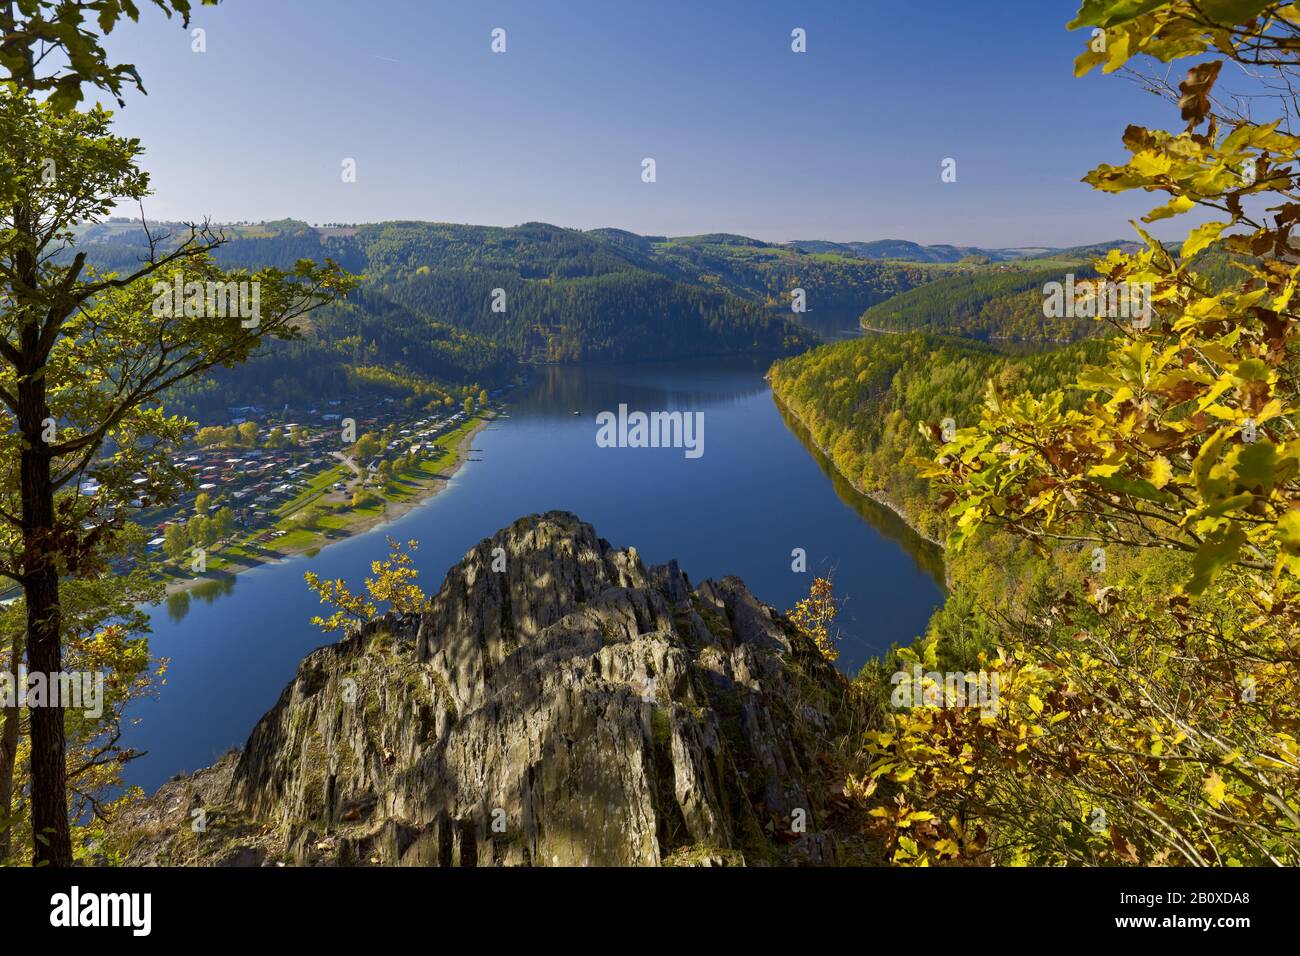 View from Bockfelsen to the Hohenwarte dam of the river Saale near Gössitz, Thuringia, Germany, Stock Photo